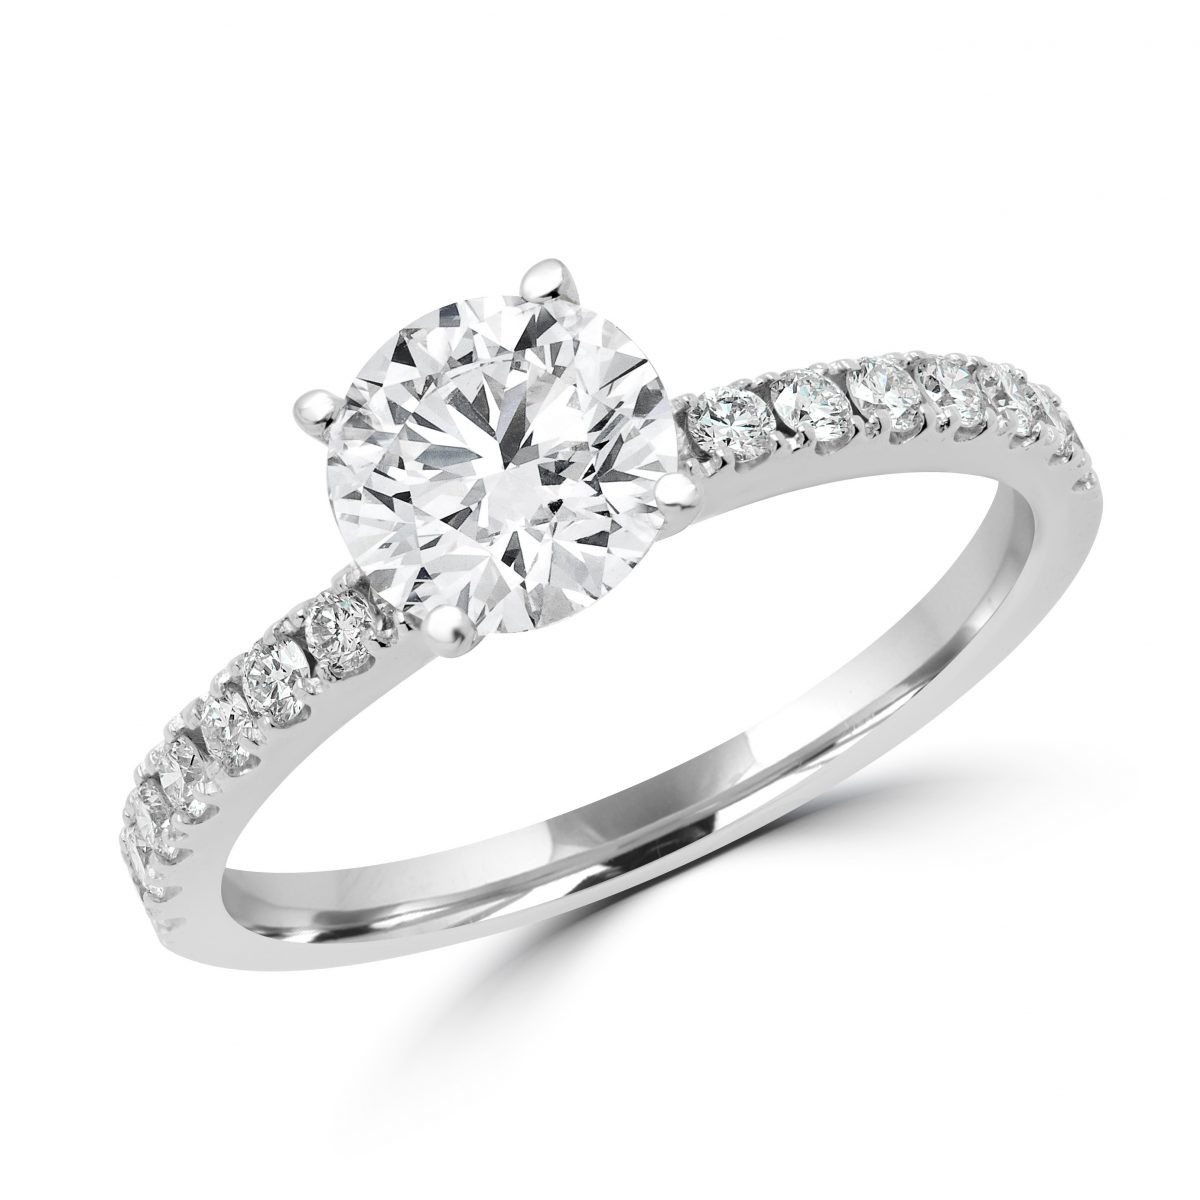 Classic solitaire engagement ring 1.55 (ctw) in 14k white gold